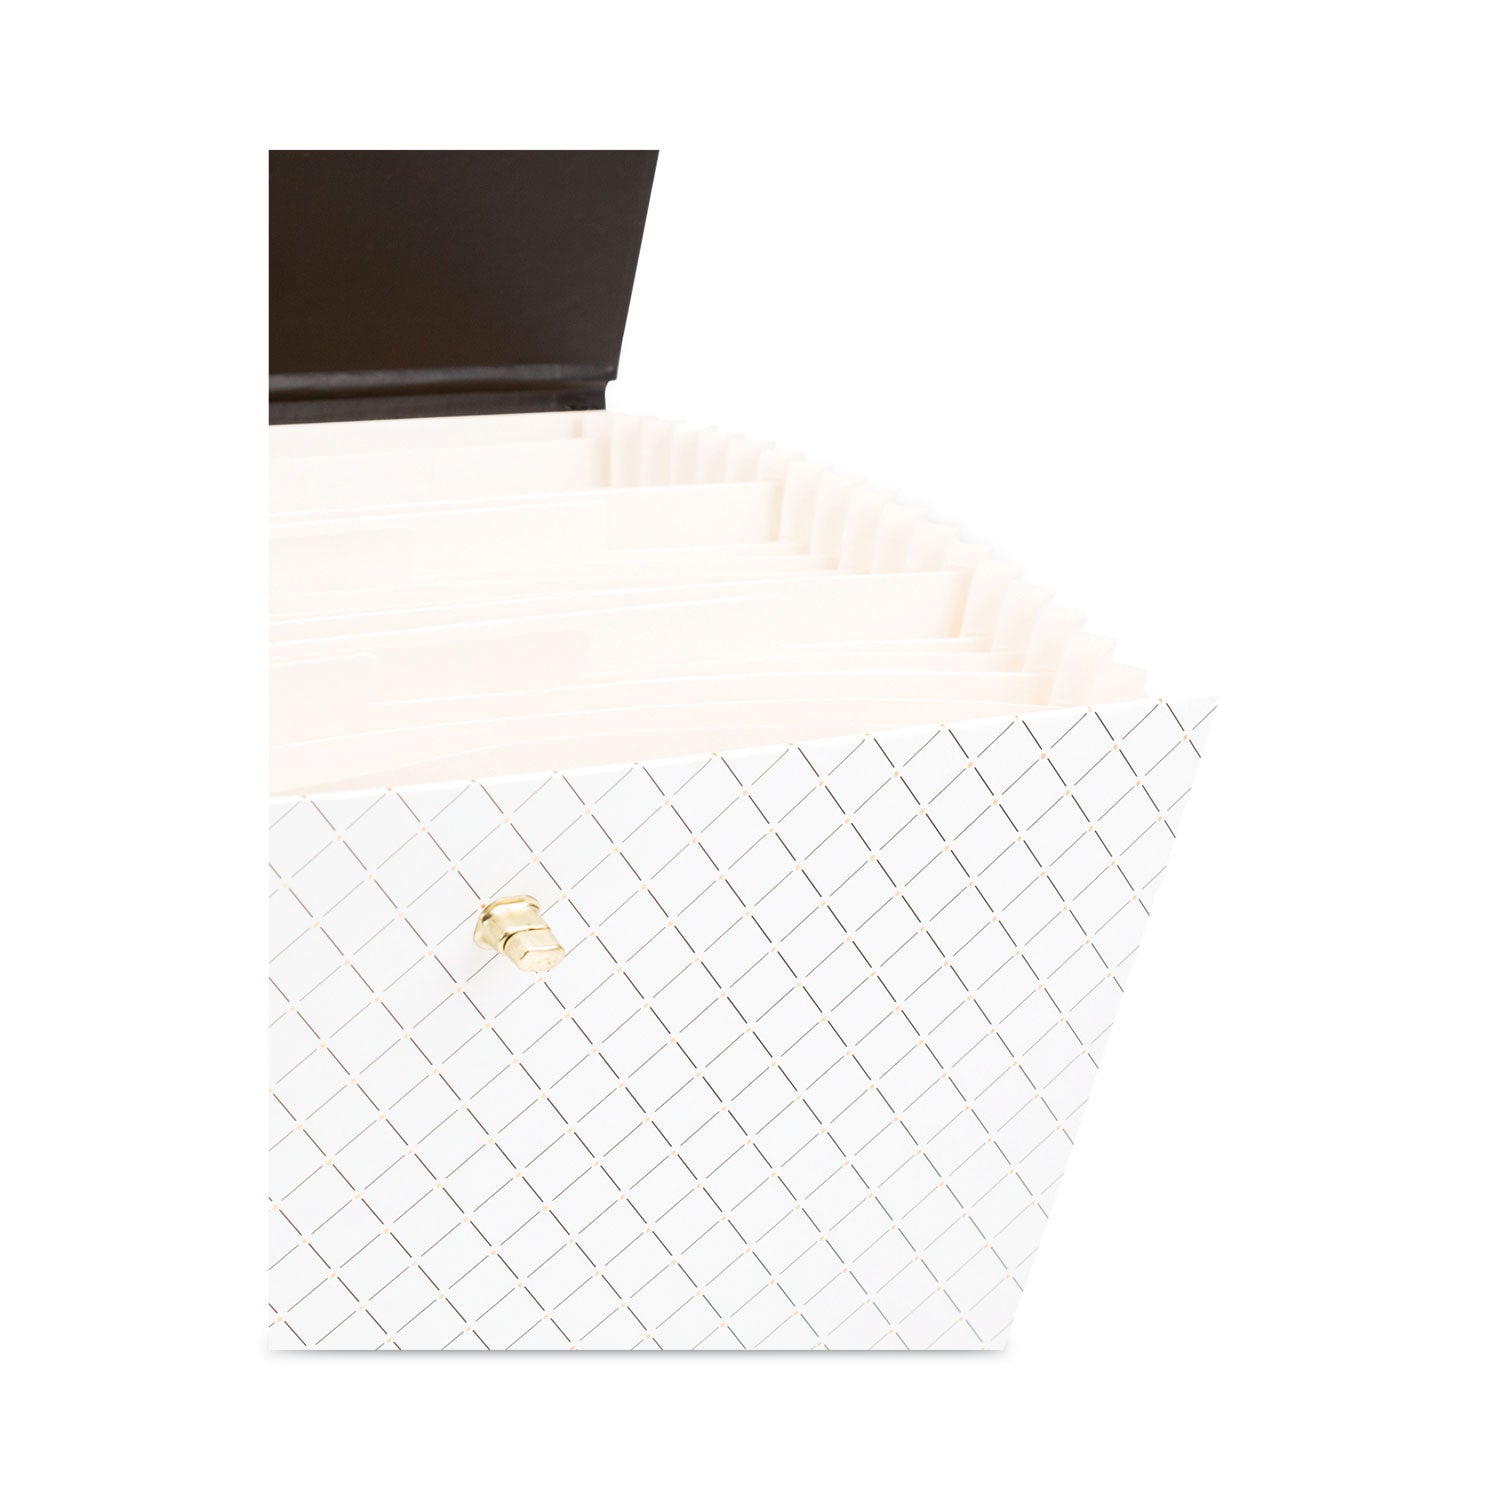 expanding-file-box-525-expansion-19-sections-twist-lock-latch-closure-2-5-cut-tabs-letter-size-white-black-gold_ubr2201u0206 - 4